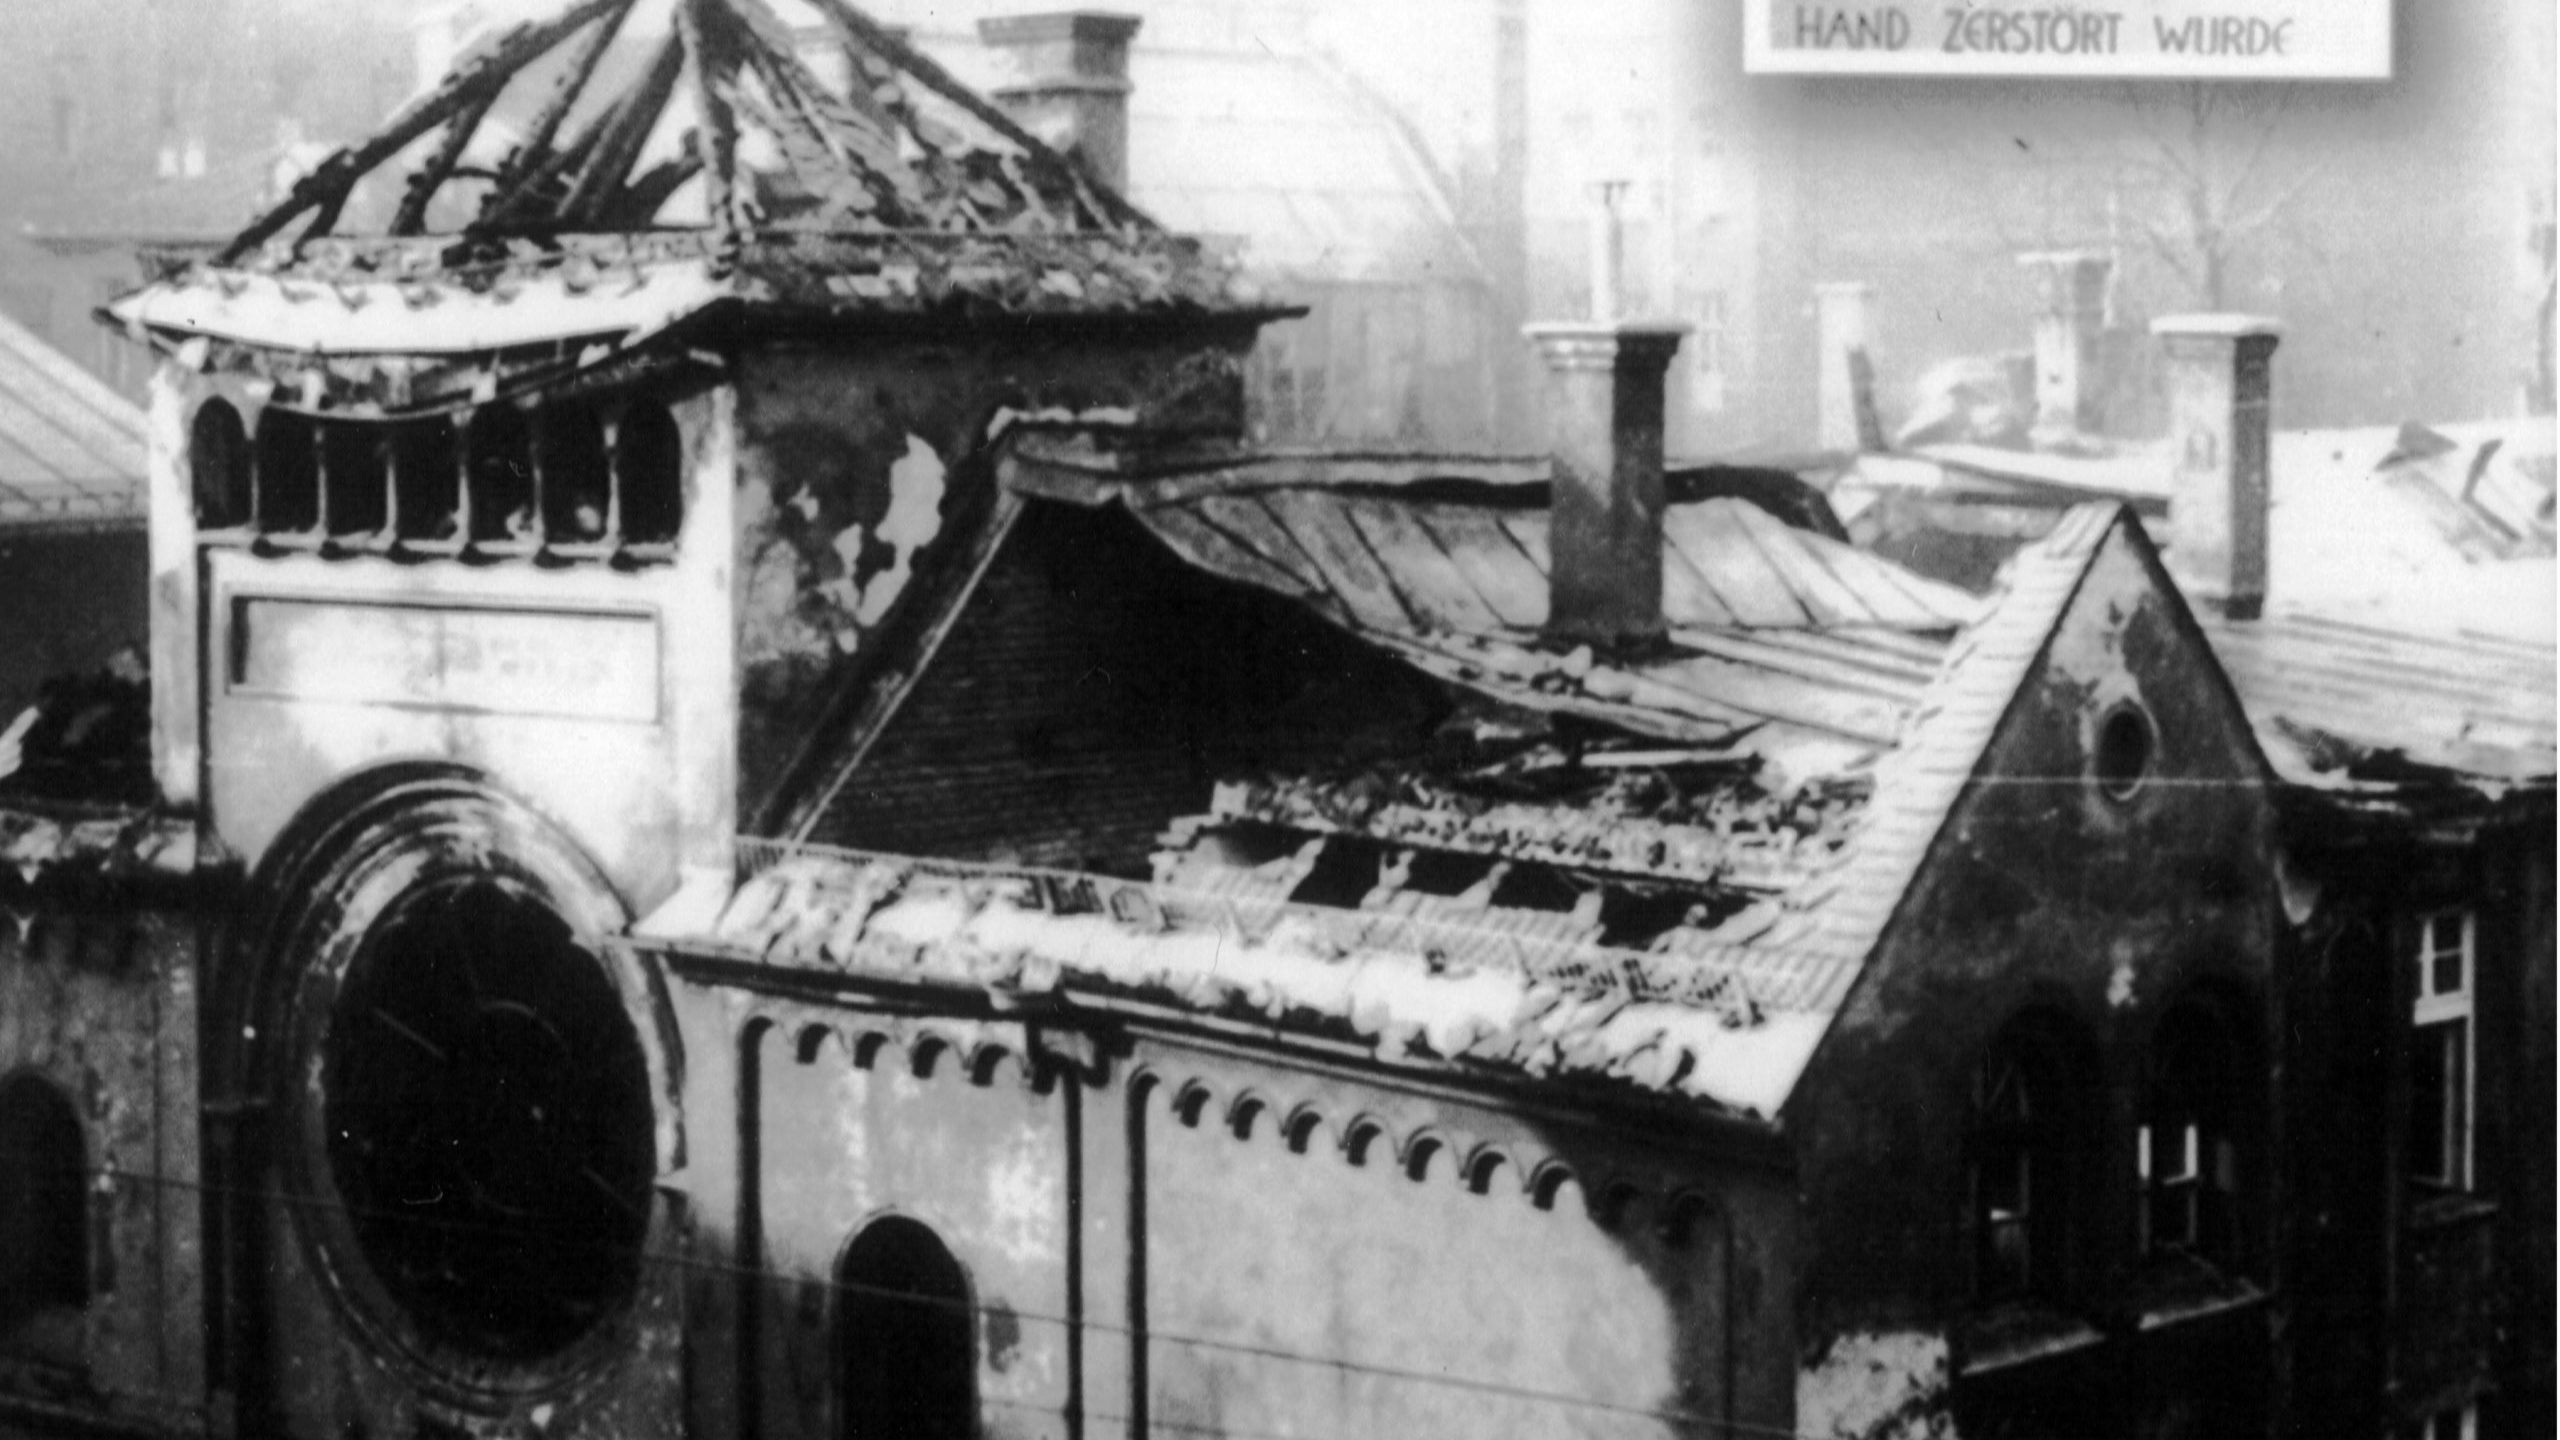 Rabbi Marc Schneier: World Leaders’ Silence After Kristallnacht a ‘Shameful Monument … to Moral Indifference’ (AUDIO INTERVIEW)